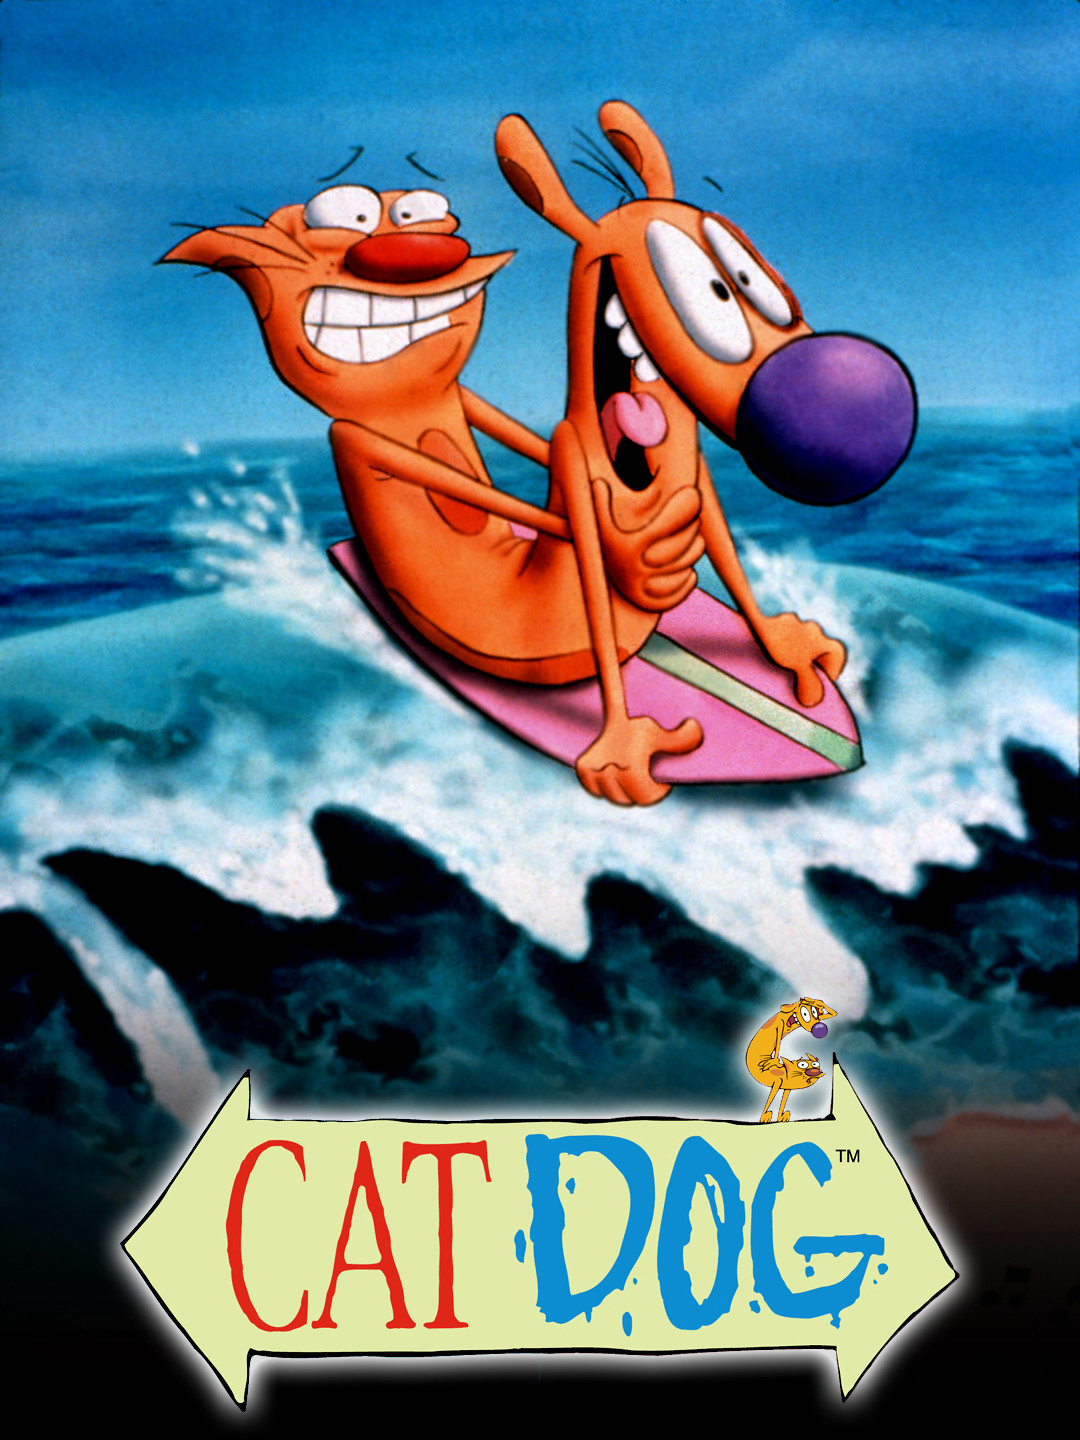 Current approaches to workplace wellbeing are like playing 'CatDog'!